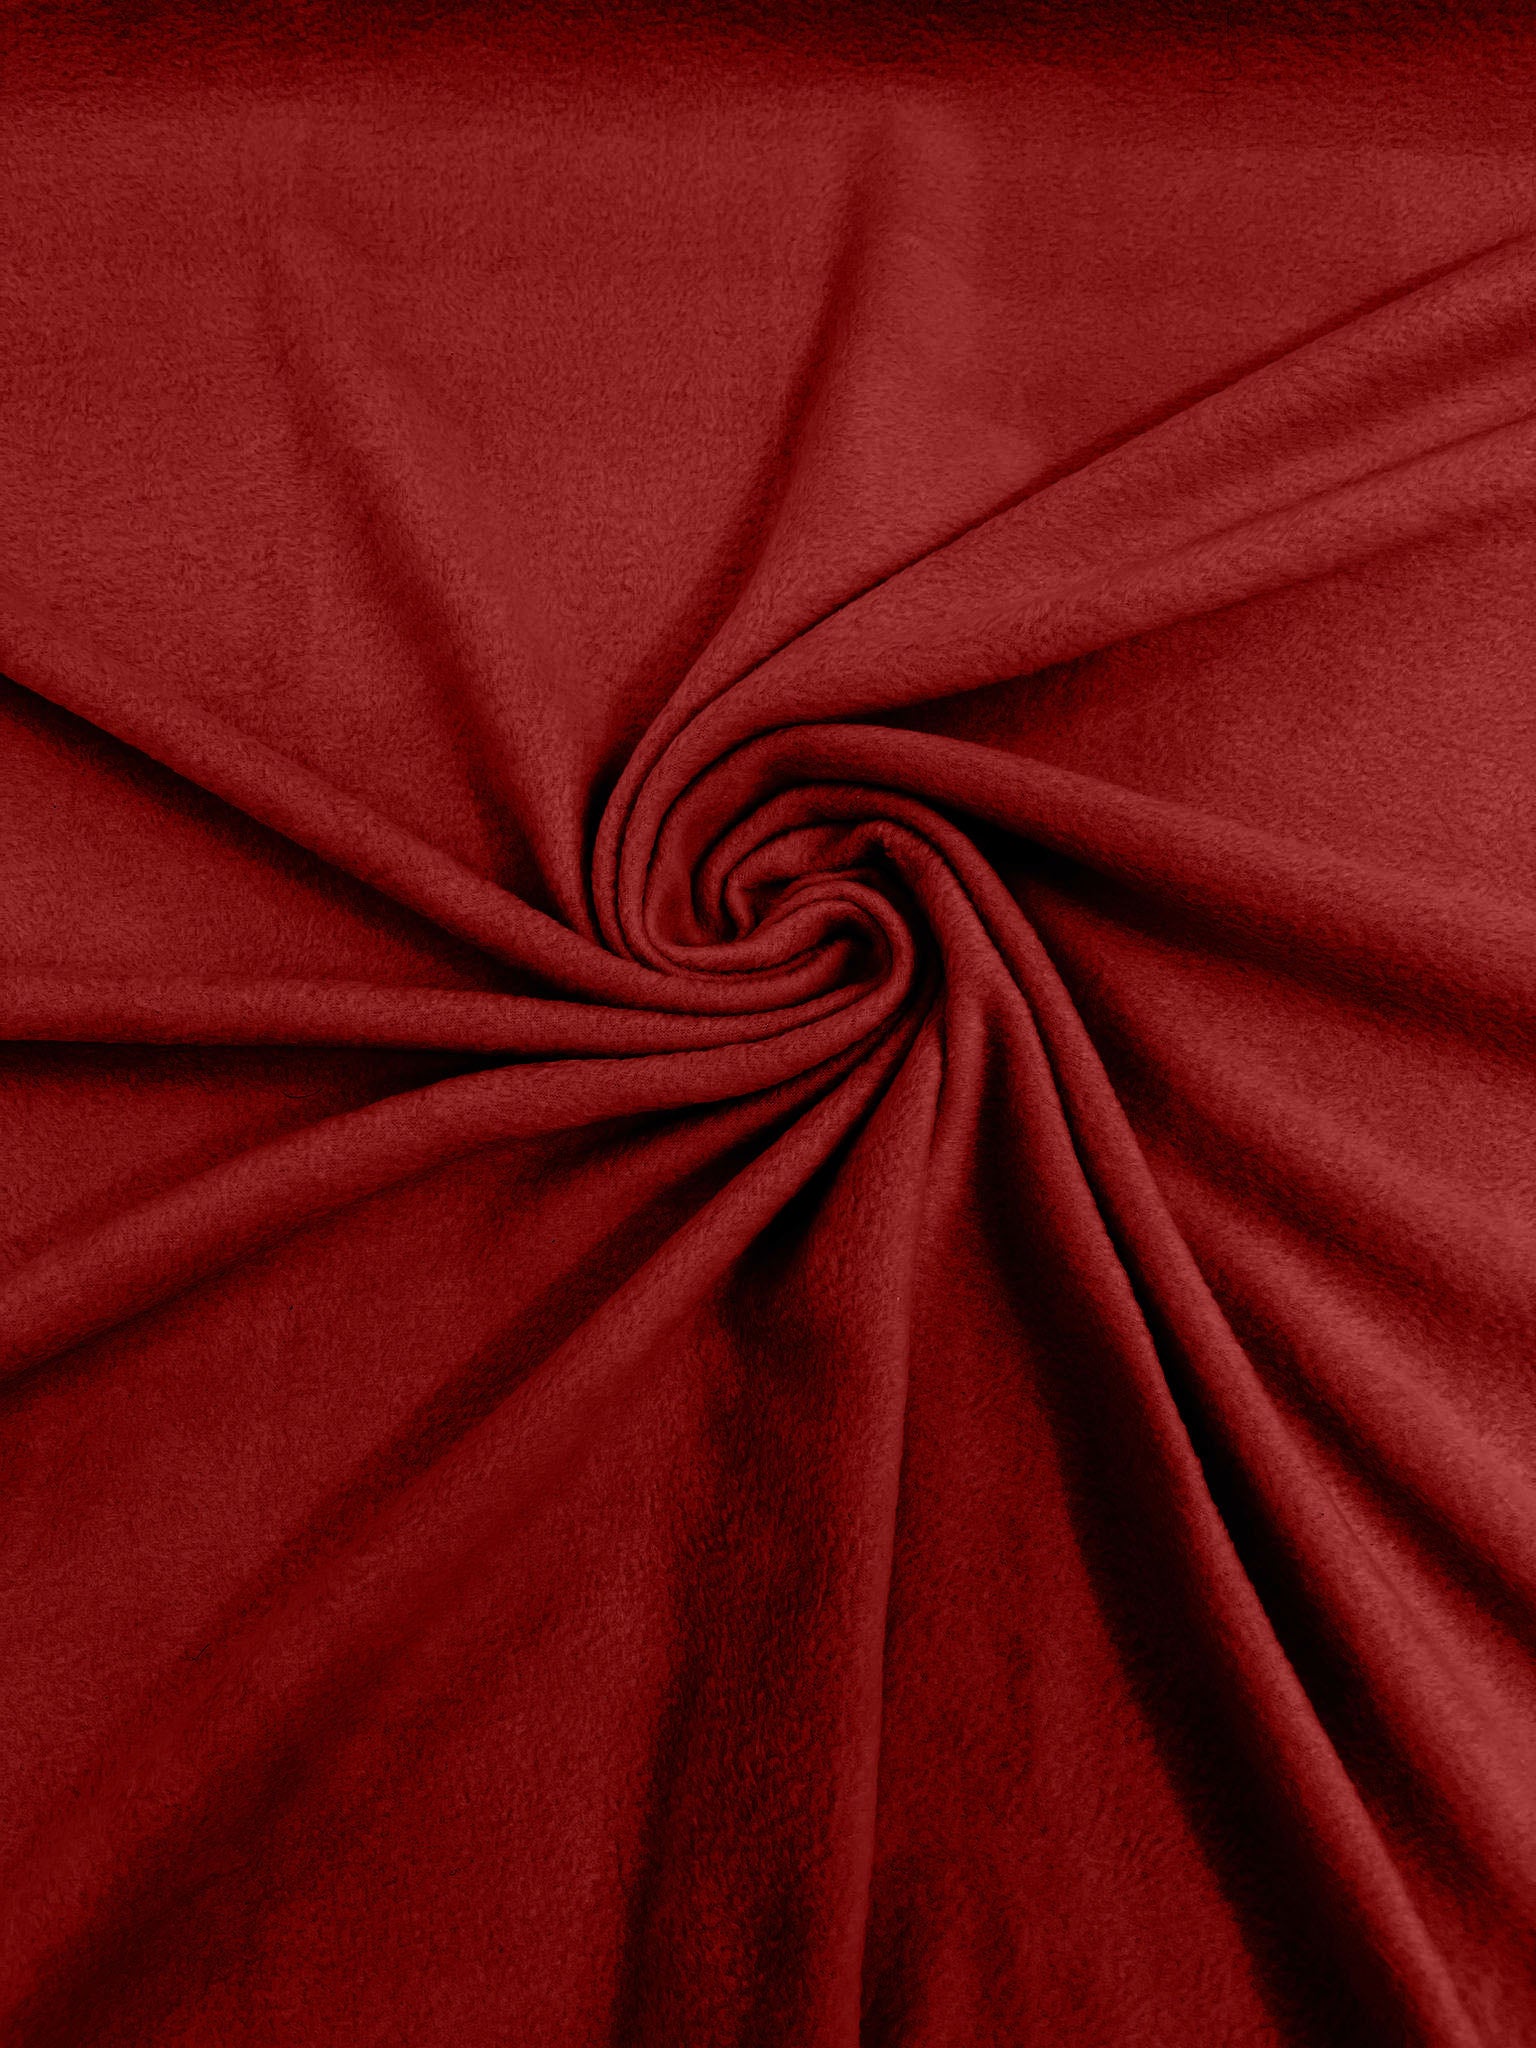 Dark Red Solid Polar Fleece Fabric Anti-Pill 58" Wide Sold by The Yard